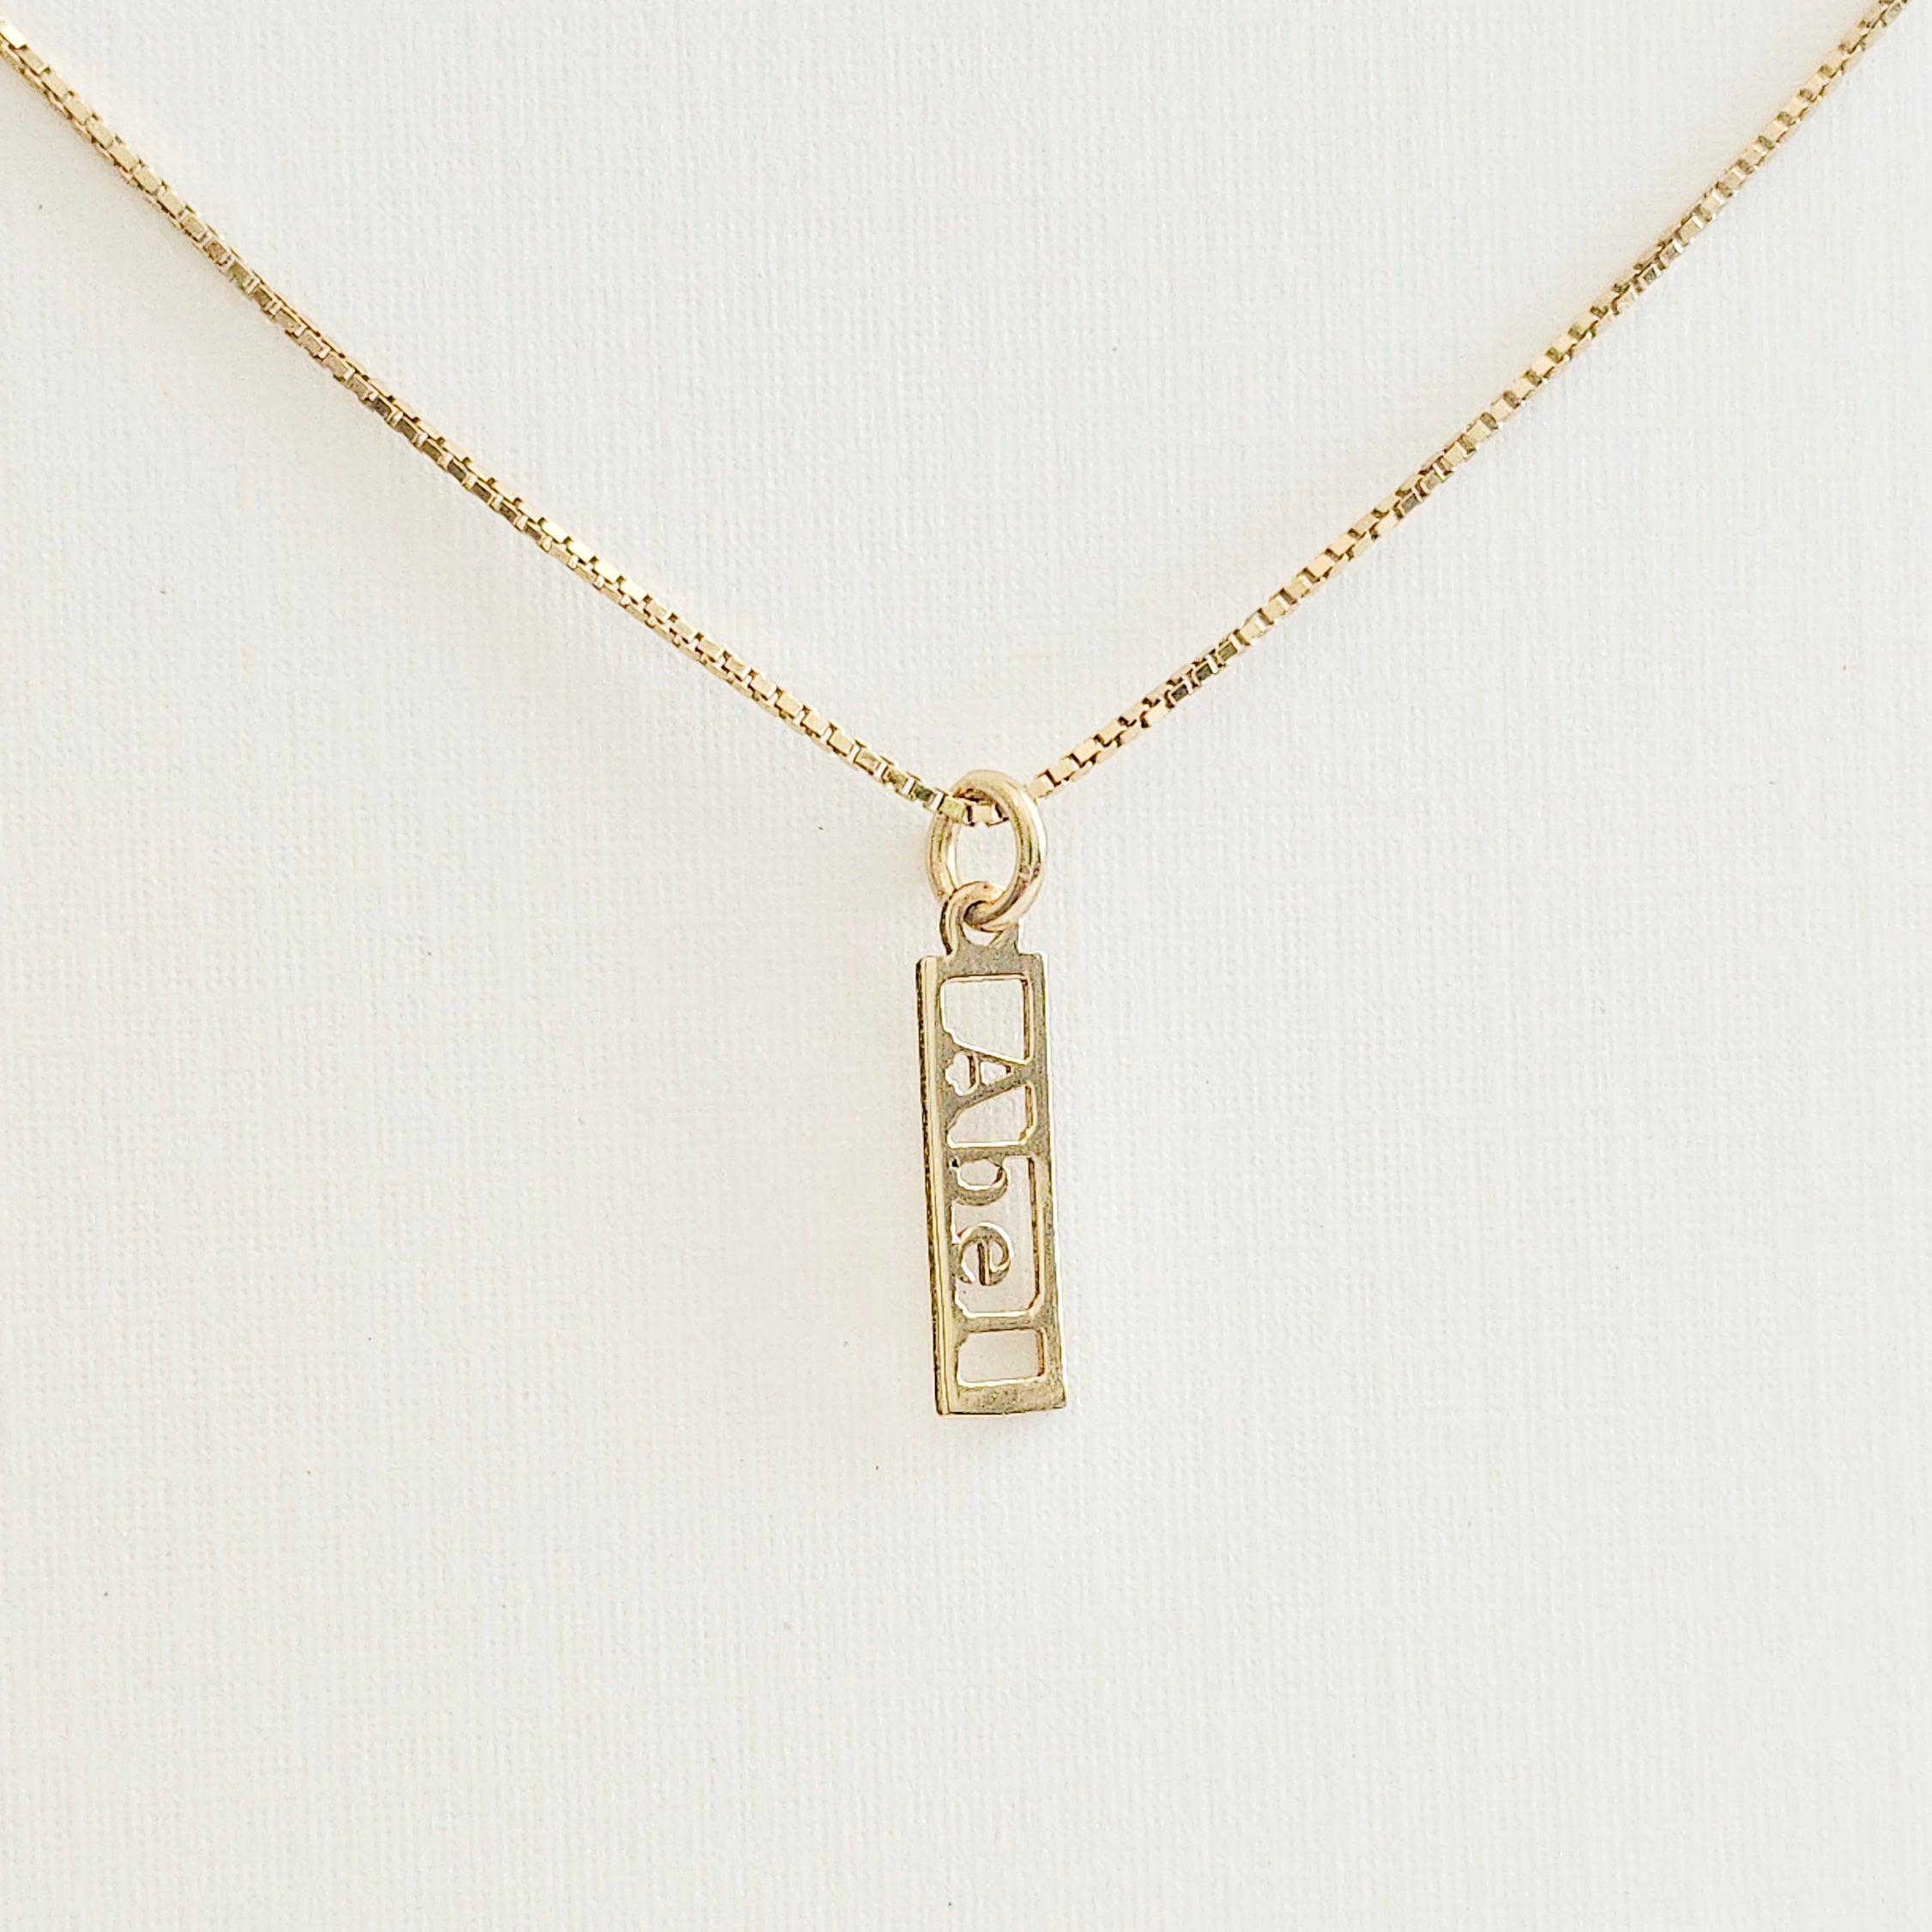 Henley Name Charm Necklace